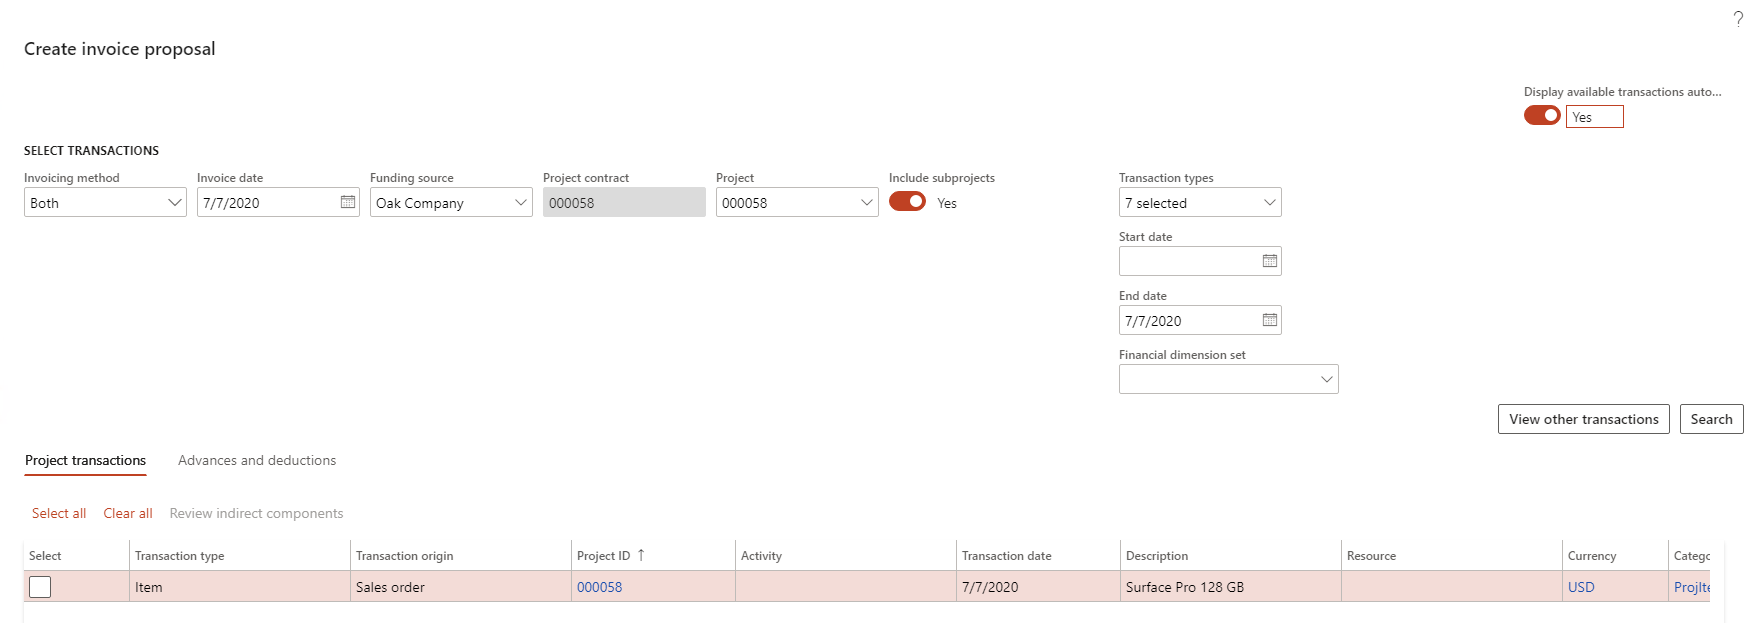 Project invoice proposal creation dialog box showing sales order transactions